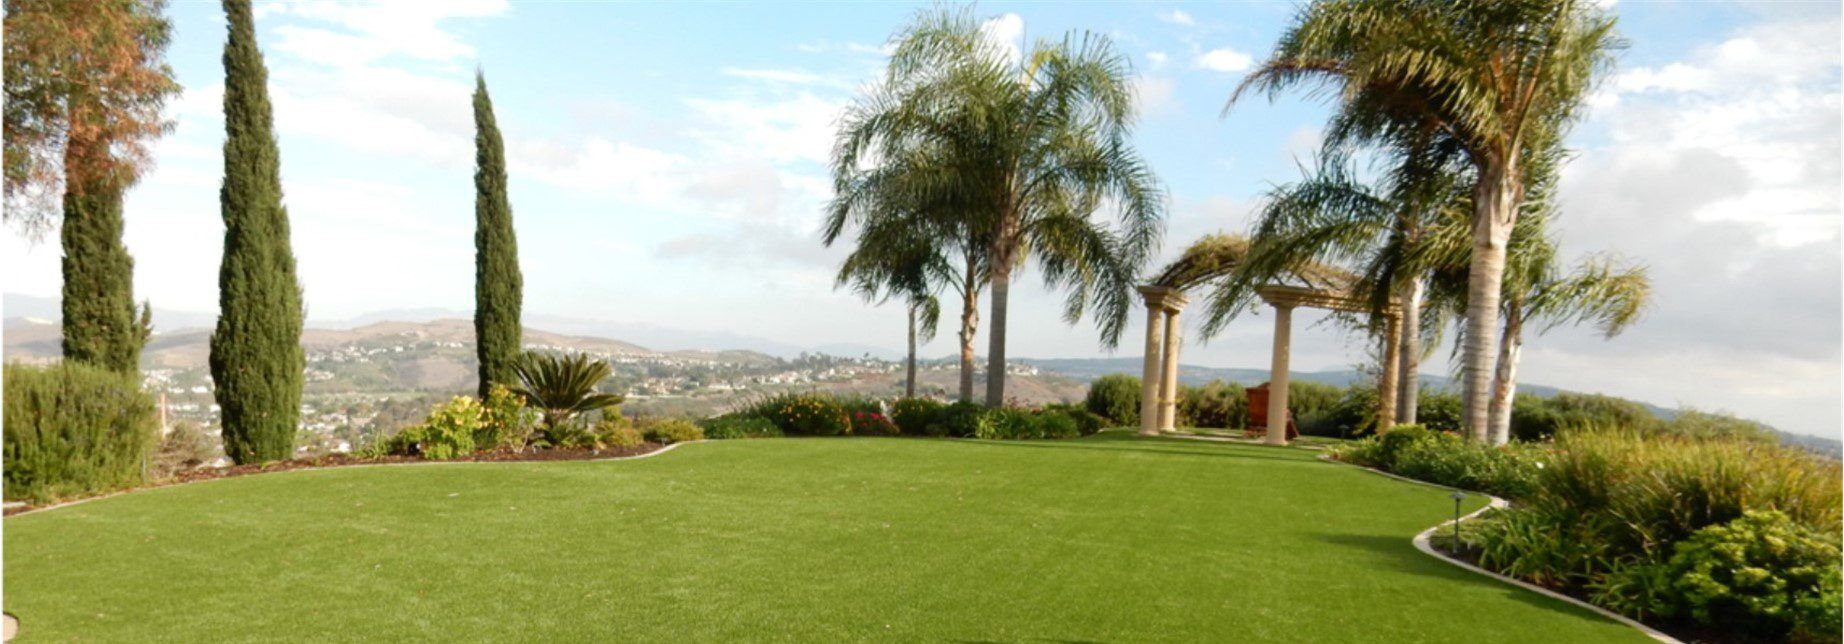 Residential Artificial Grass Landscapes & Pavers, Green-R Turf, Corona